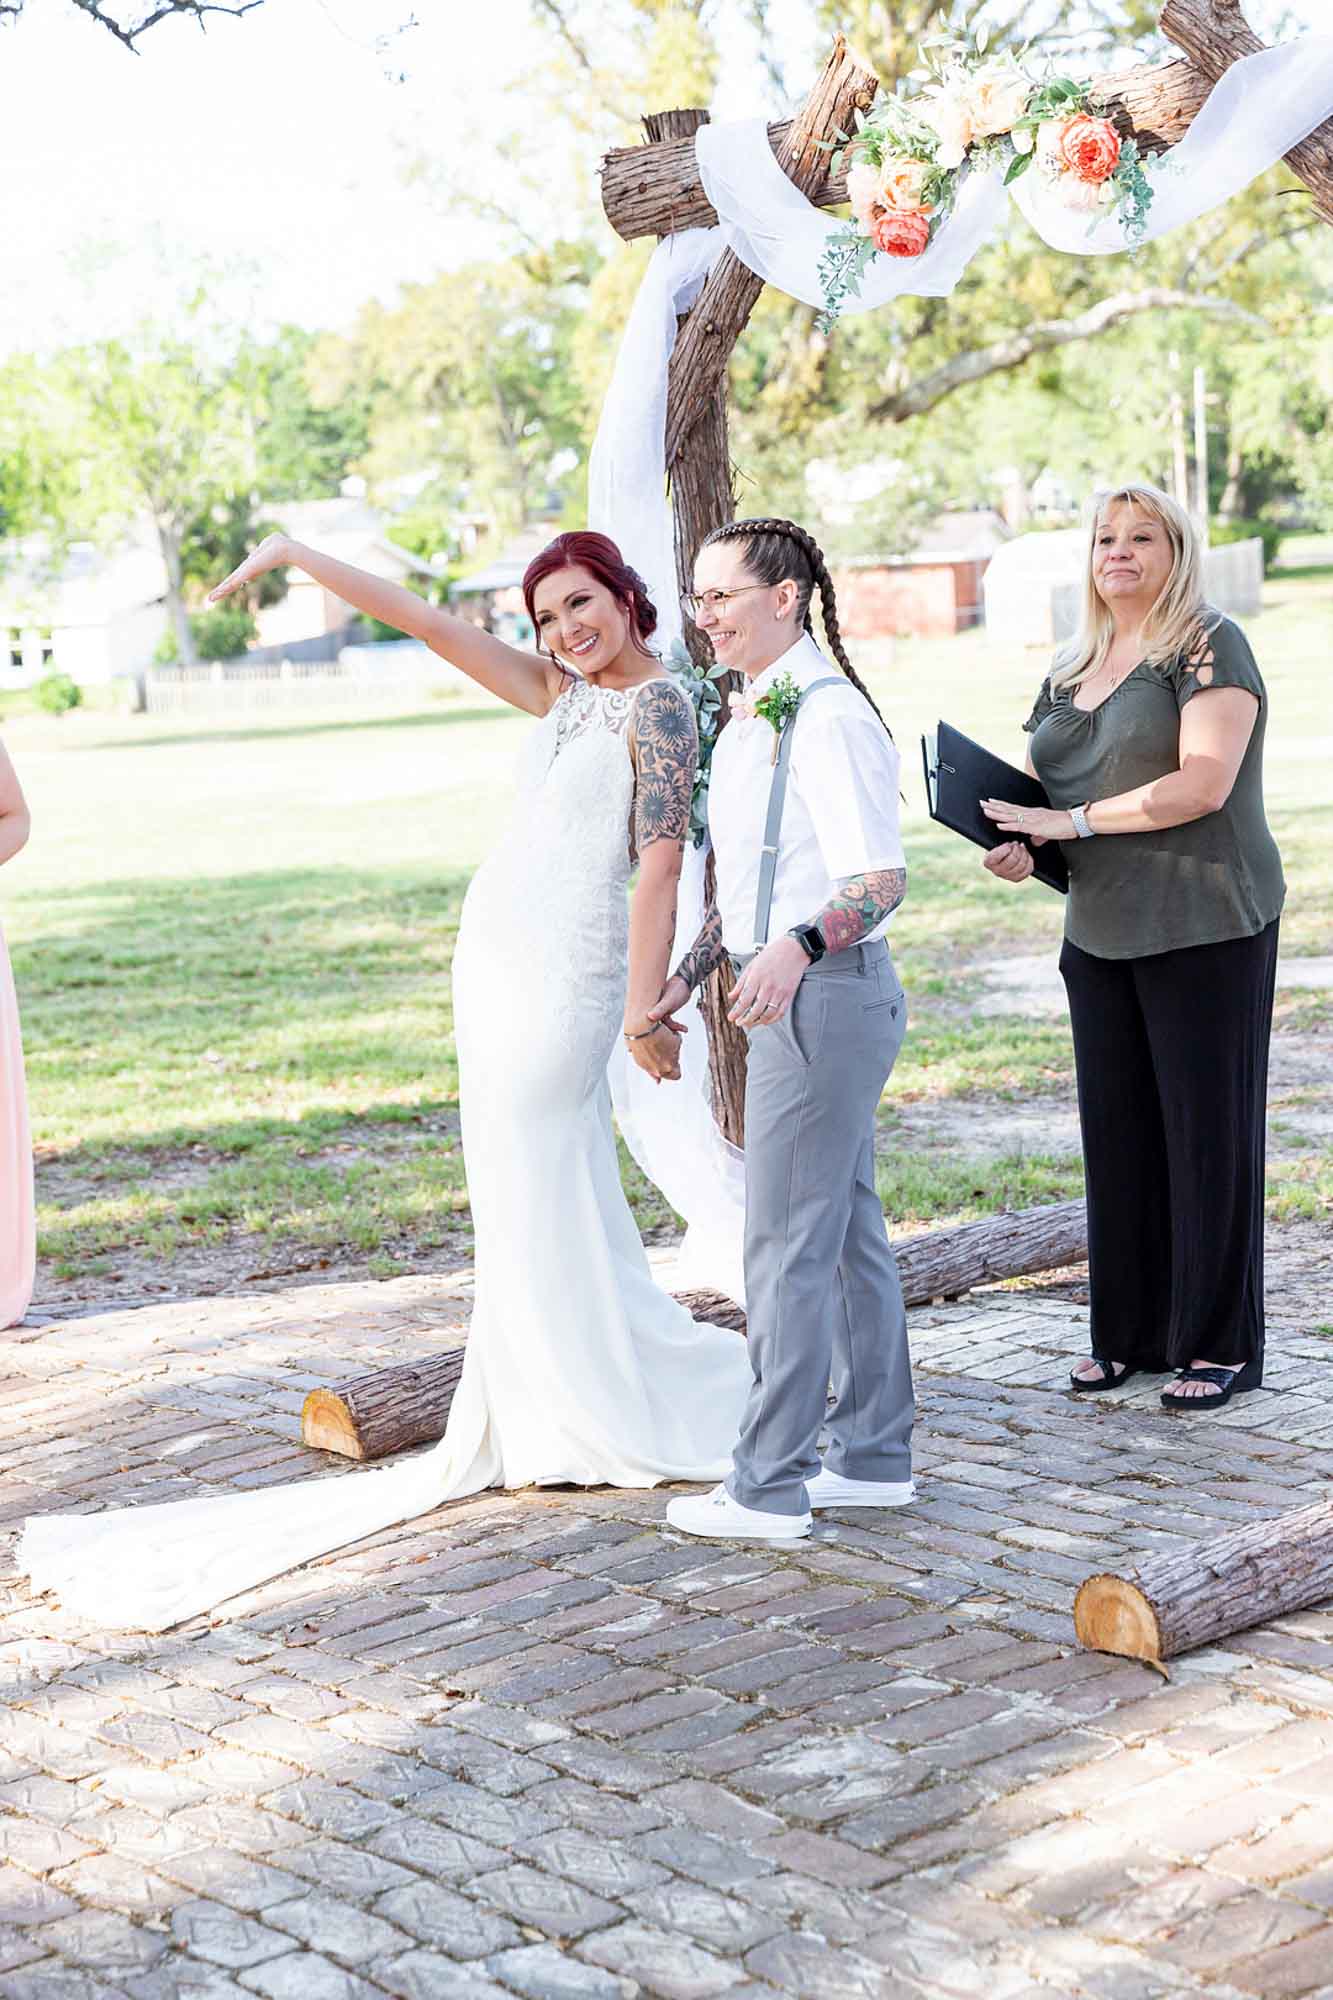 Florida gold club wedding with wooden arch and log cake | Joshua & Inez Photography | Featured on Equally Wed, the leading LGBTQ+ wedding magazine